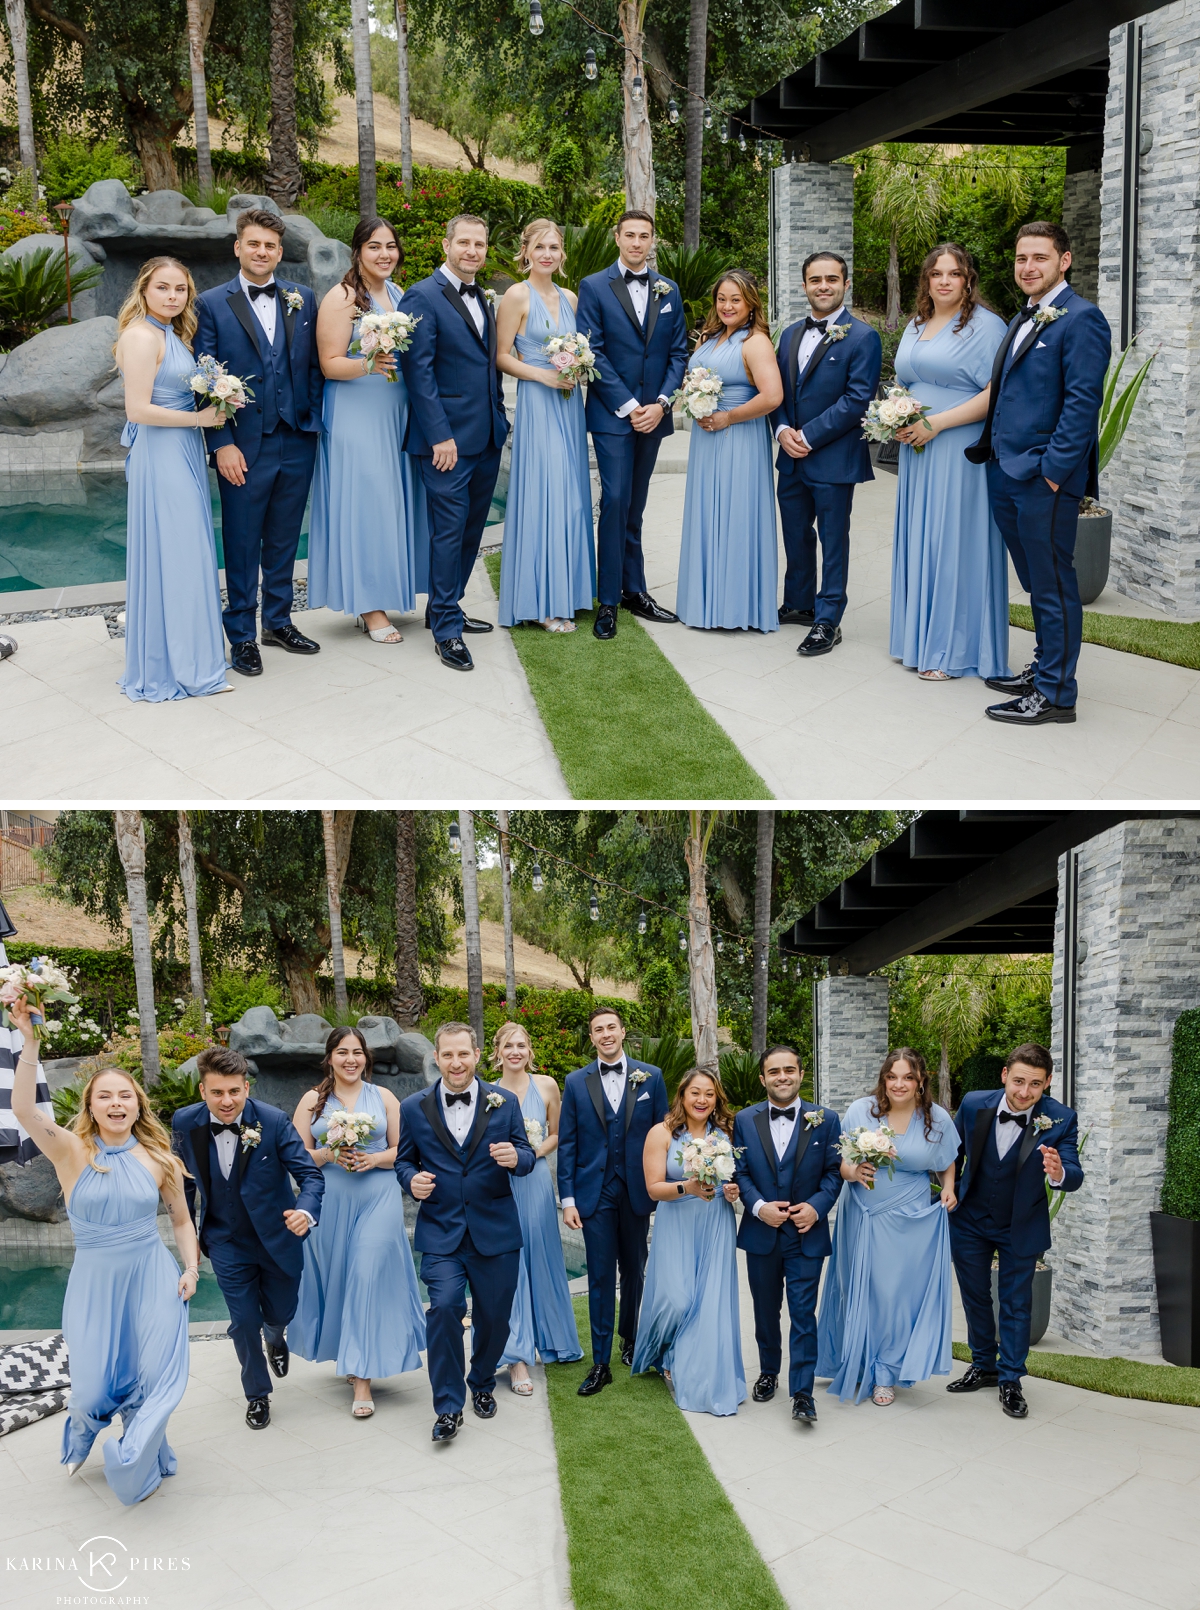 Dusty blue bridesmaids dresses, with groomsmen in navy suits